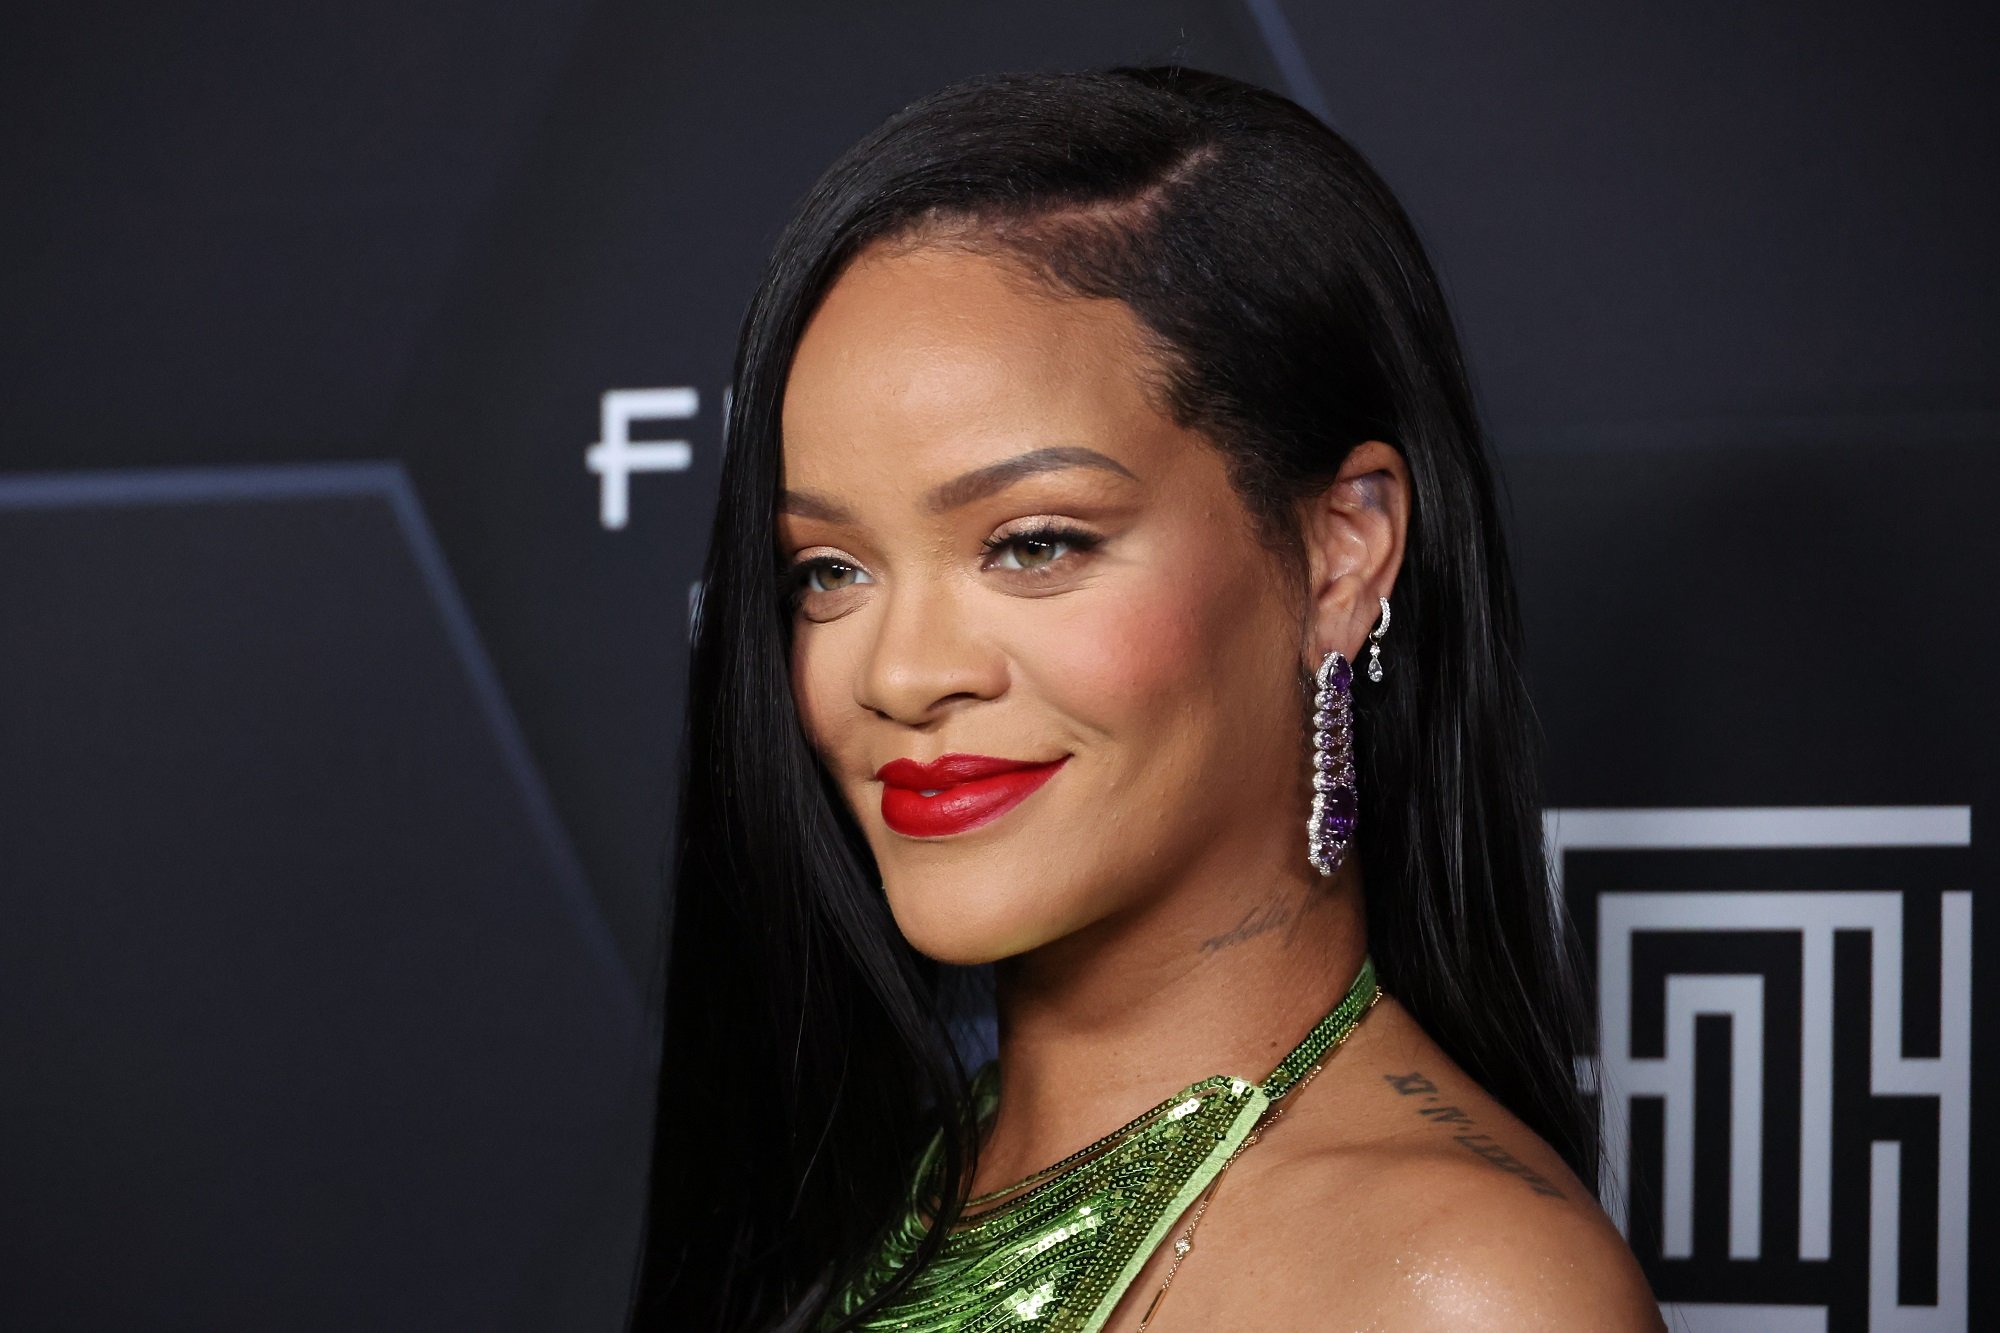 Rihanna smiles in front of a black background